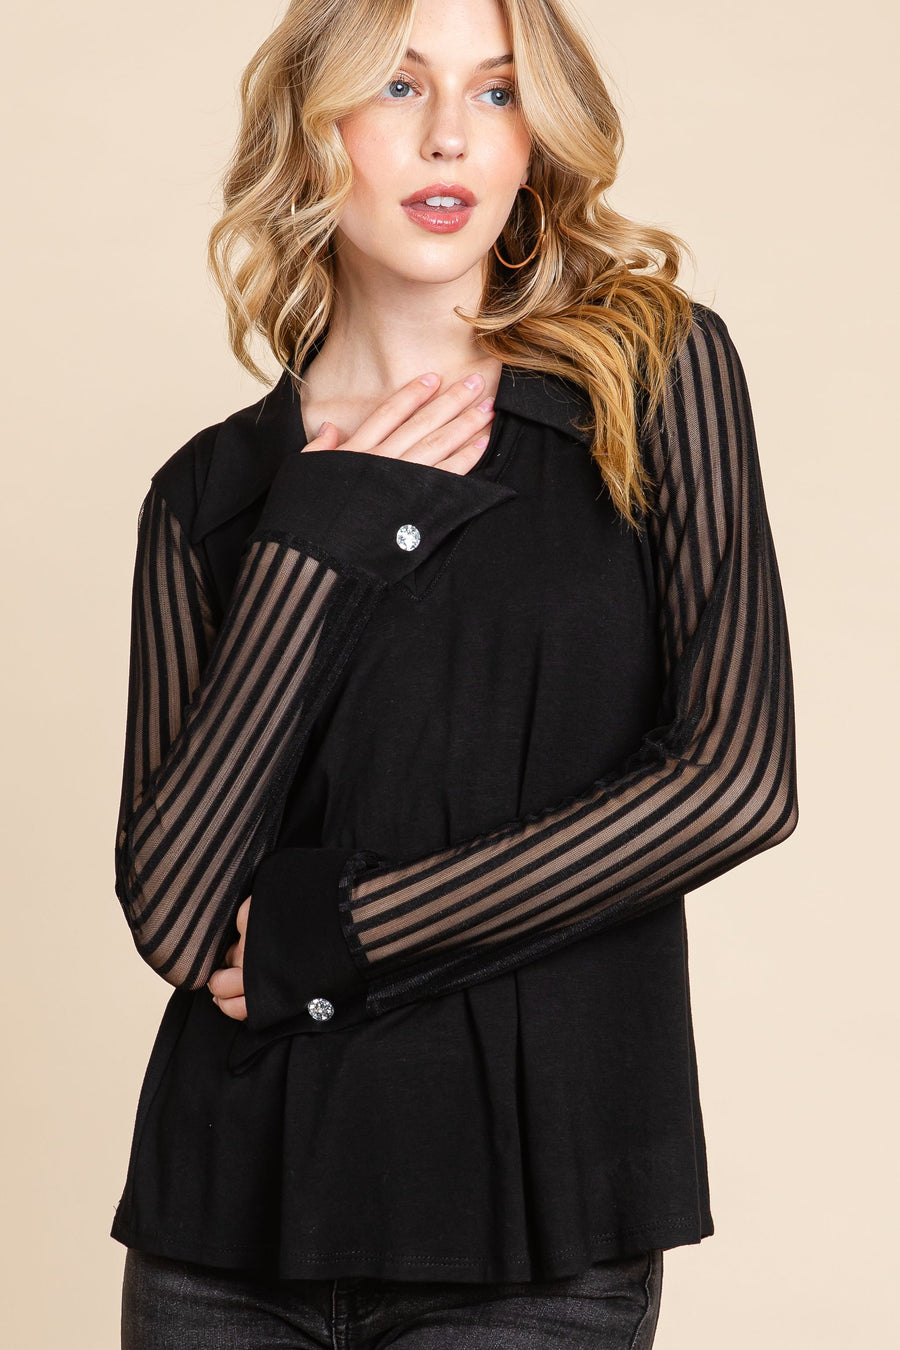 Enid V-Neck Top With Mesh Sleeves | Black *FINAL SALE* (Only Small and 3X Left)